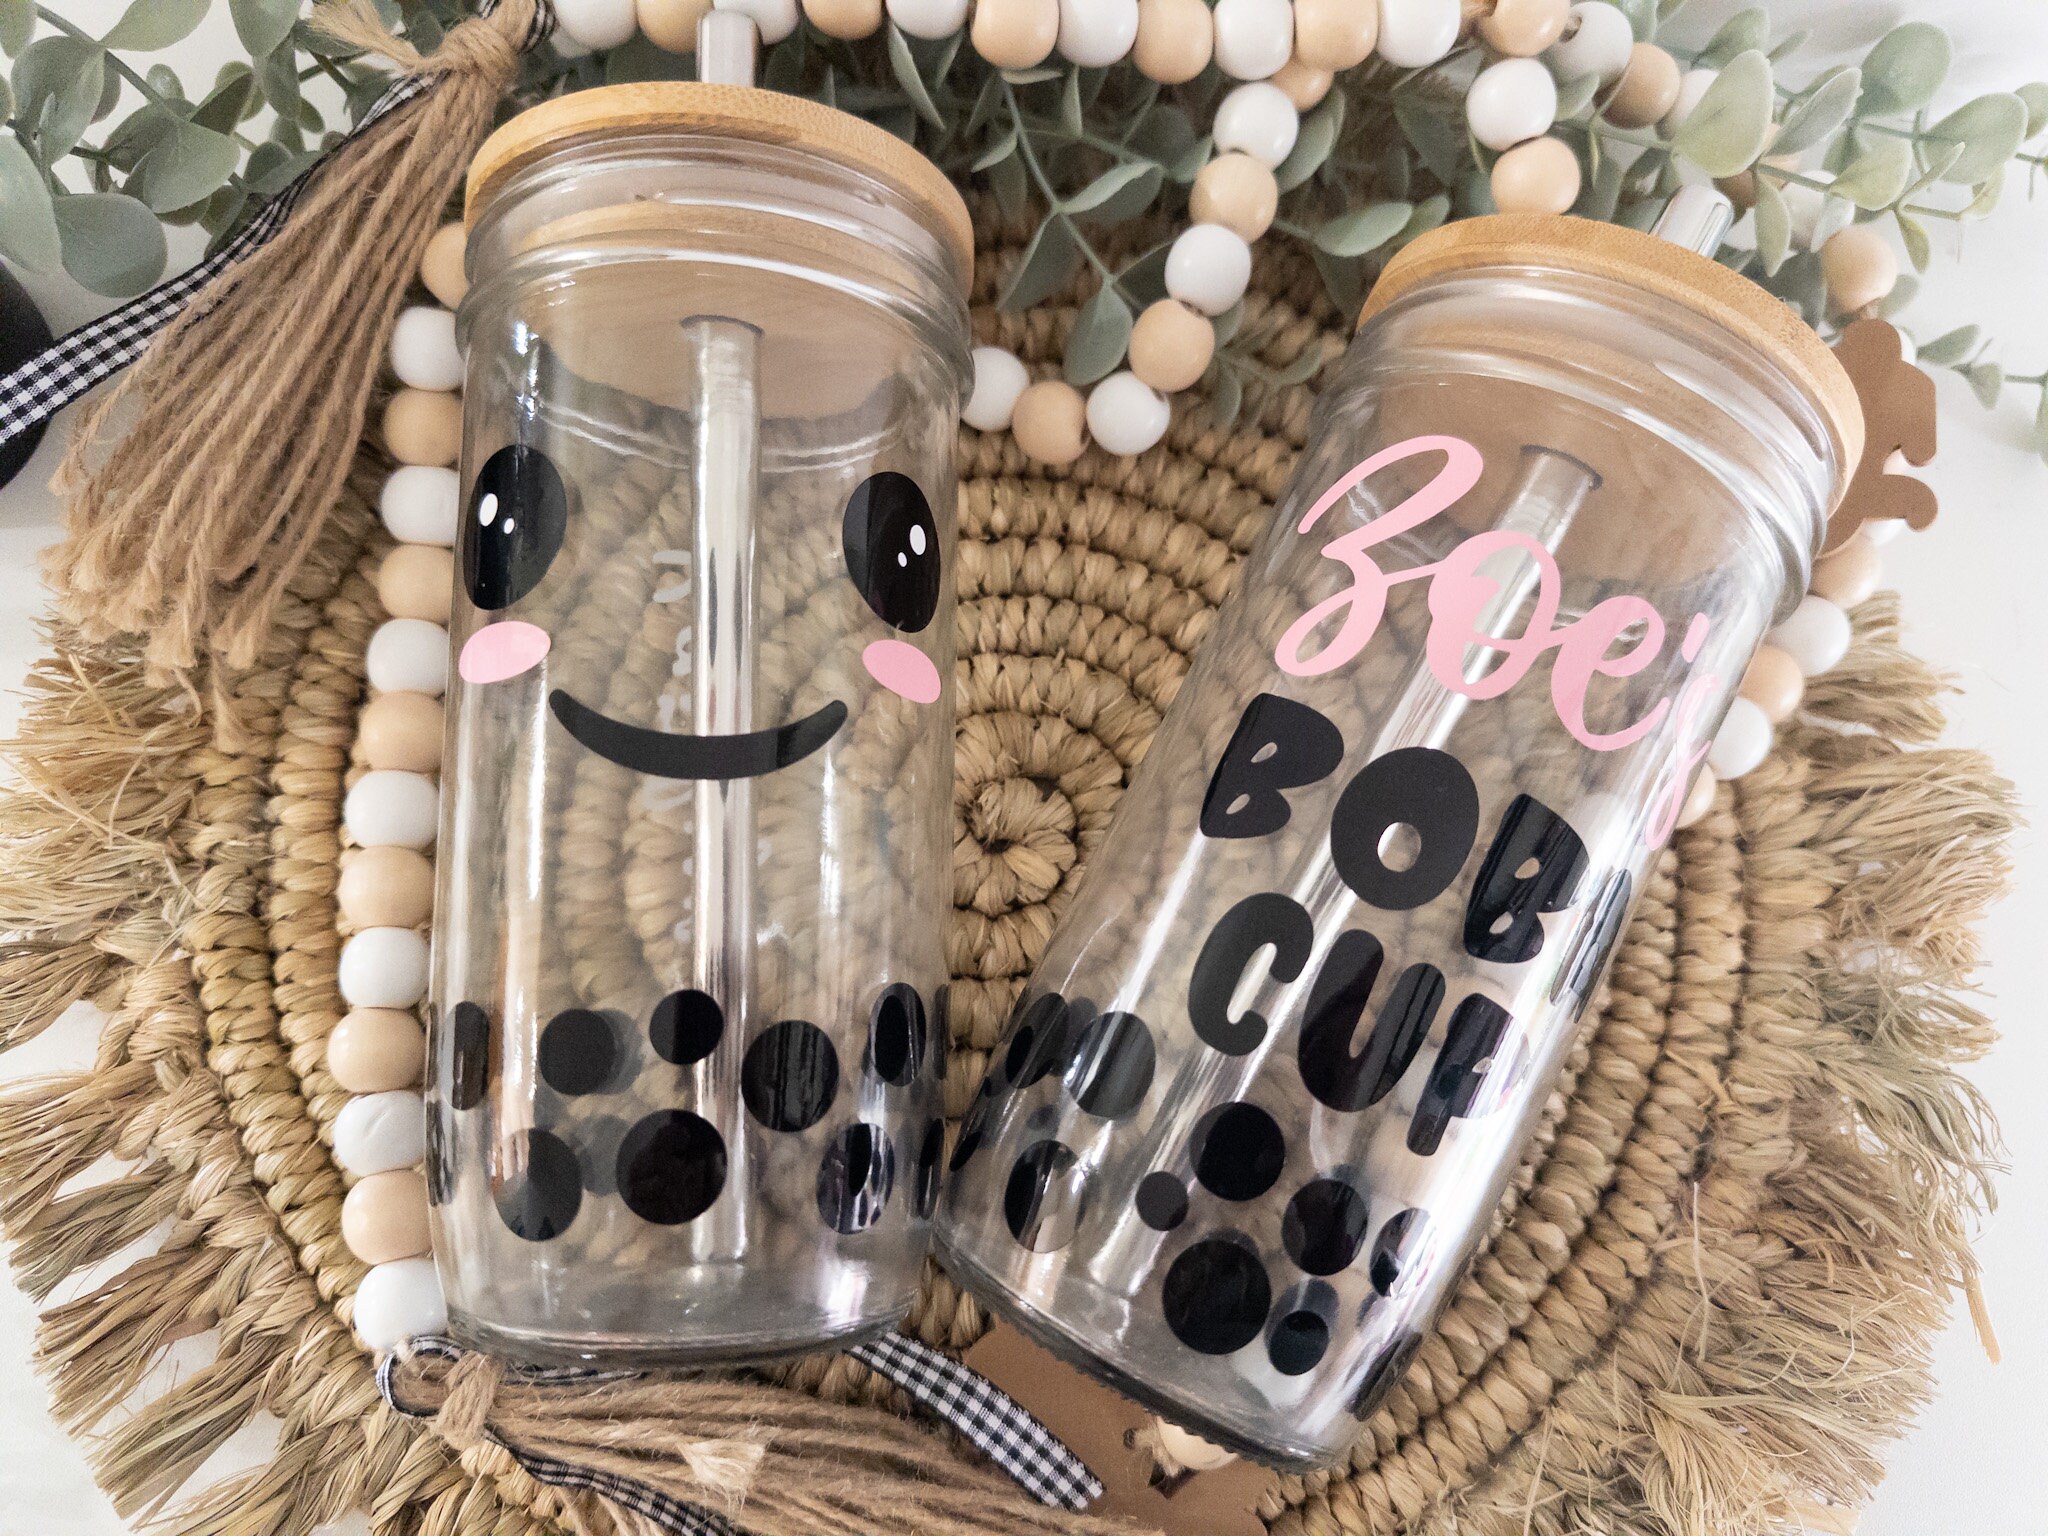 PINK Cute Glass Mason Jar Boba Cup with Bamboo Lid and Eco Straw-Buddha  Bubbles Boba Inc.